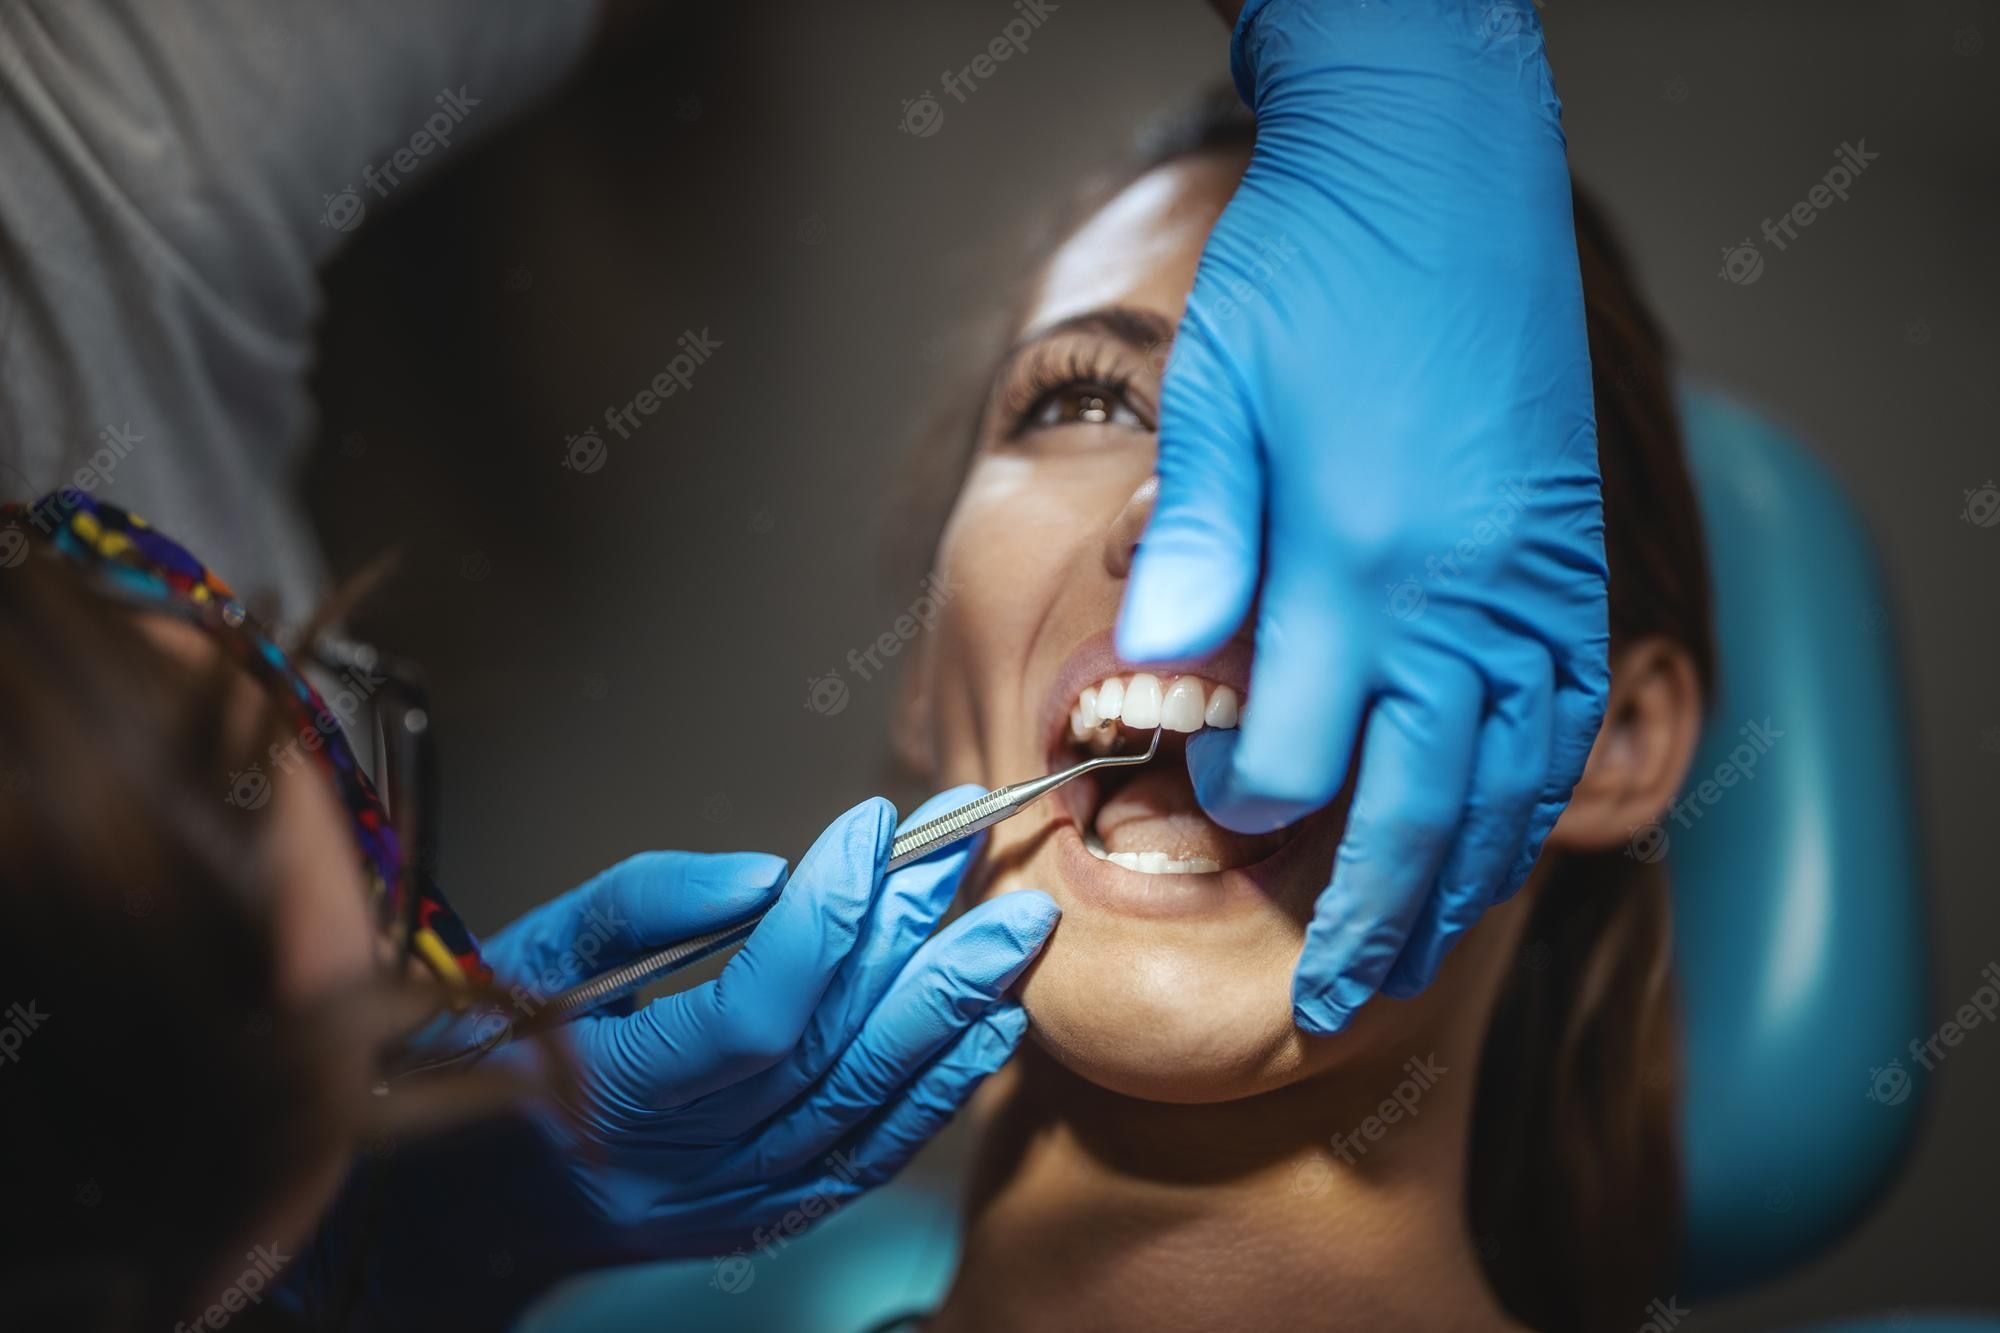 Premium Photo. The Beautiful Young Woman Is At The Dentist. She Sits In The Dentist's Chair And The Dentist Sets Braces On Her Teeth Putting Aesthetic Self Aligning Lingual Locks